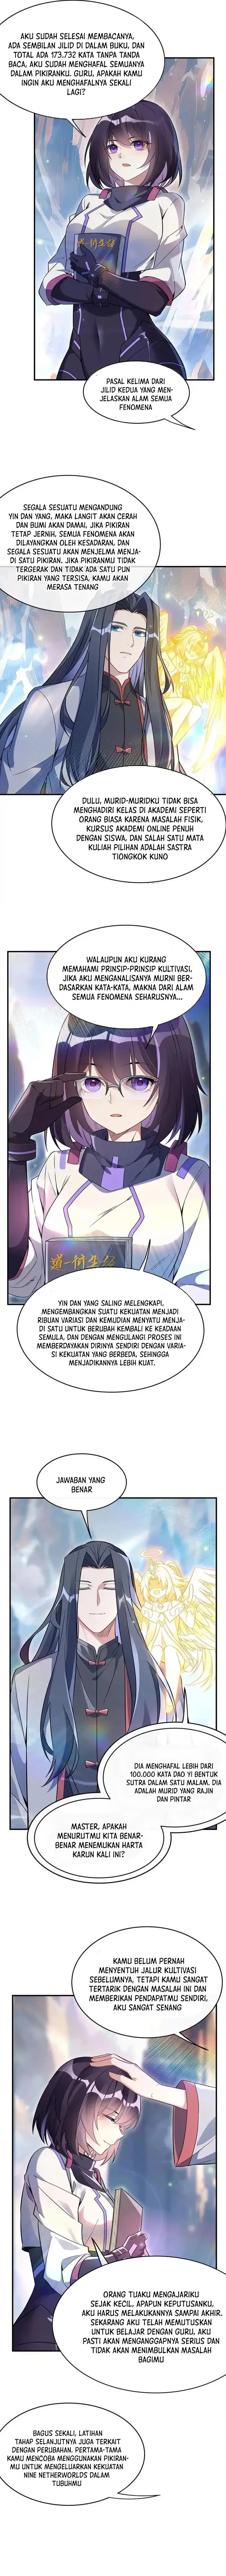 Dilarang COPAS - situs resmi www.mangacanblog.com - Komik my female apprentices are all big shots from the future 268 - chapter 268 269 Indonesia my female apprentices are all big shots from the future 268 - chapter 268 Terbaru 4|Baca Manga Komik Indonesia|Mangacan